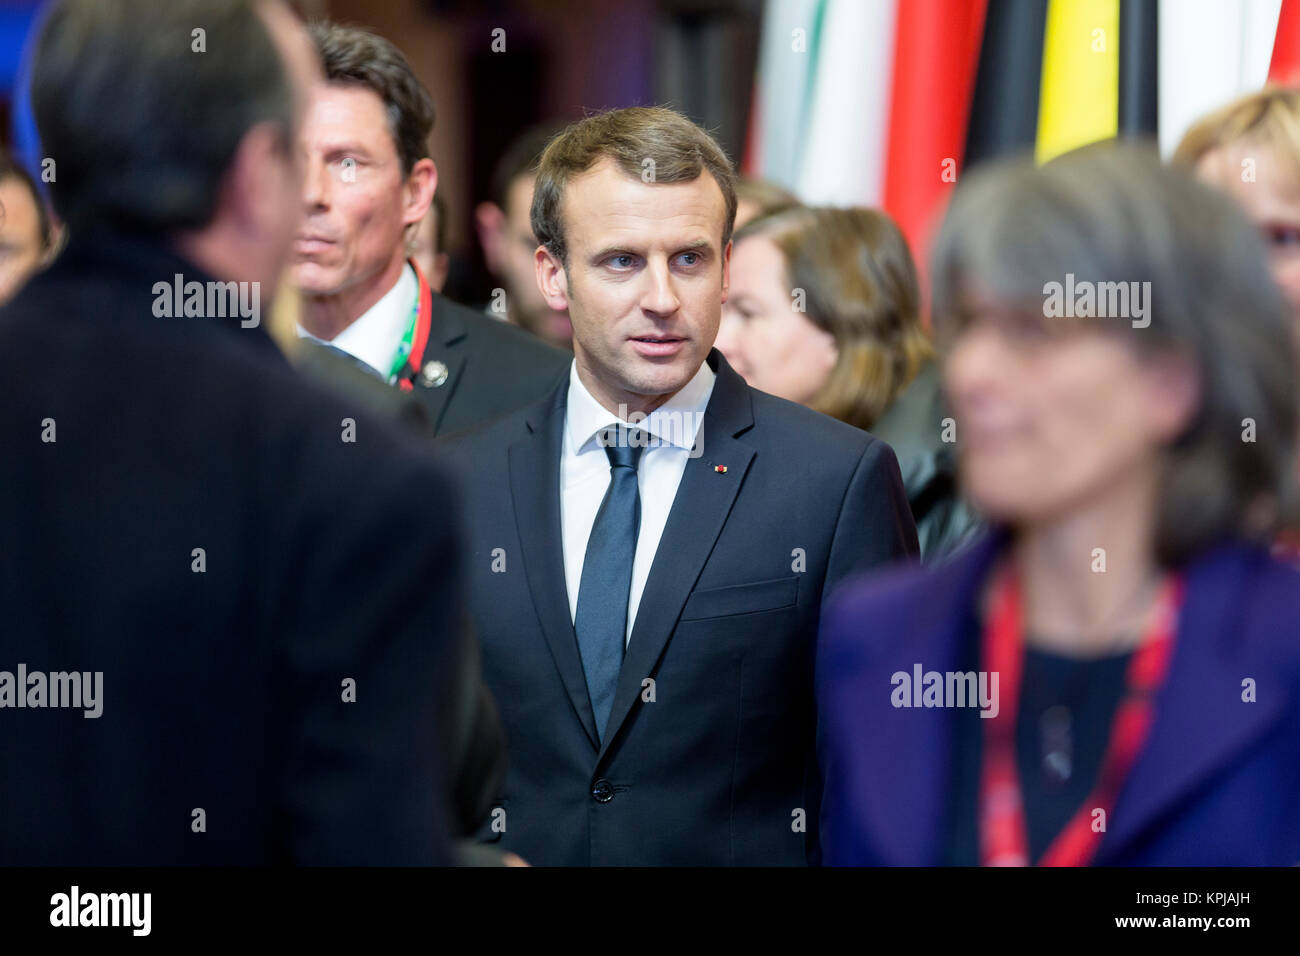 Bruxelles, Belgium. 15th Dec, 2017. December 15, 2017 - Brussels, Belgium: German Chancellor (Unseen) and French President Emmanuel Macron address a media conference at an EU summit. Credit: Andia/Alamy Live News Stock Photo